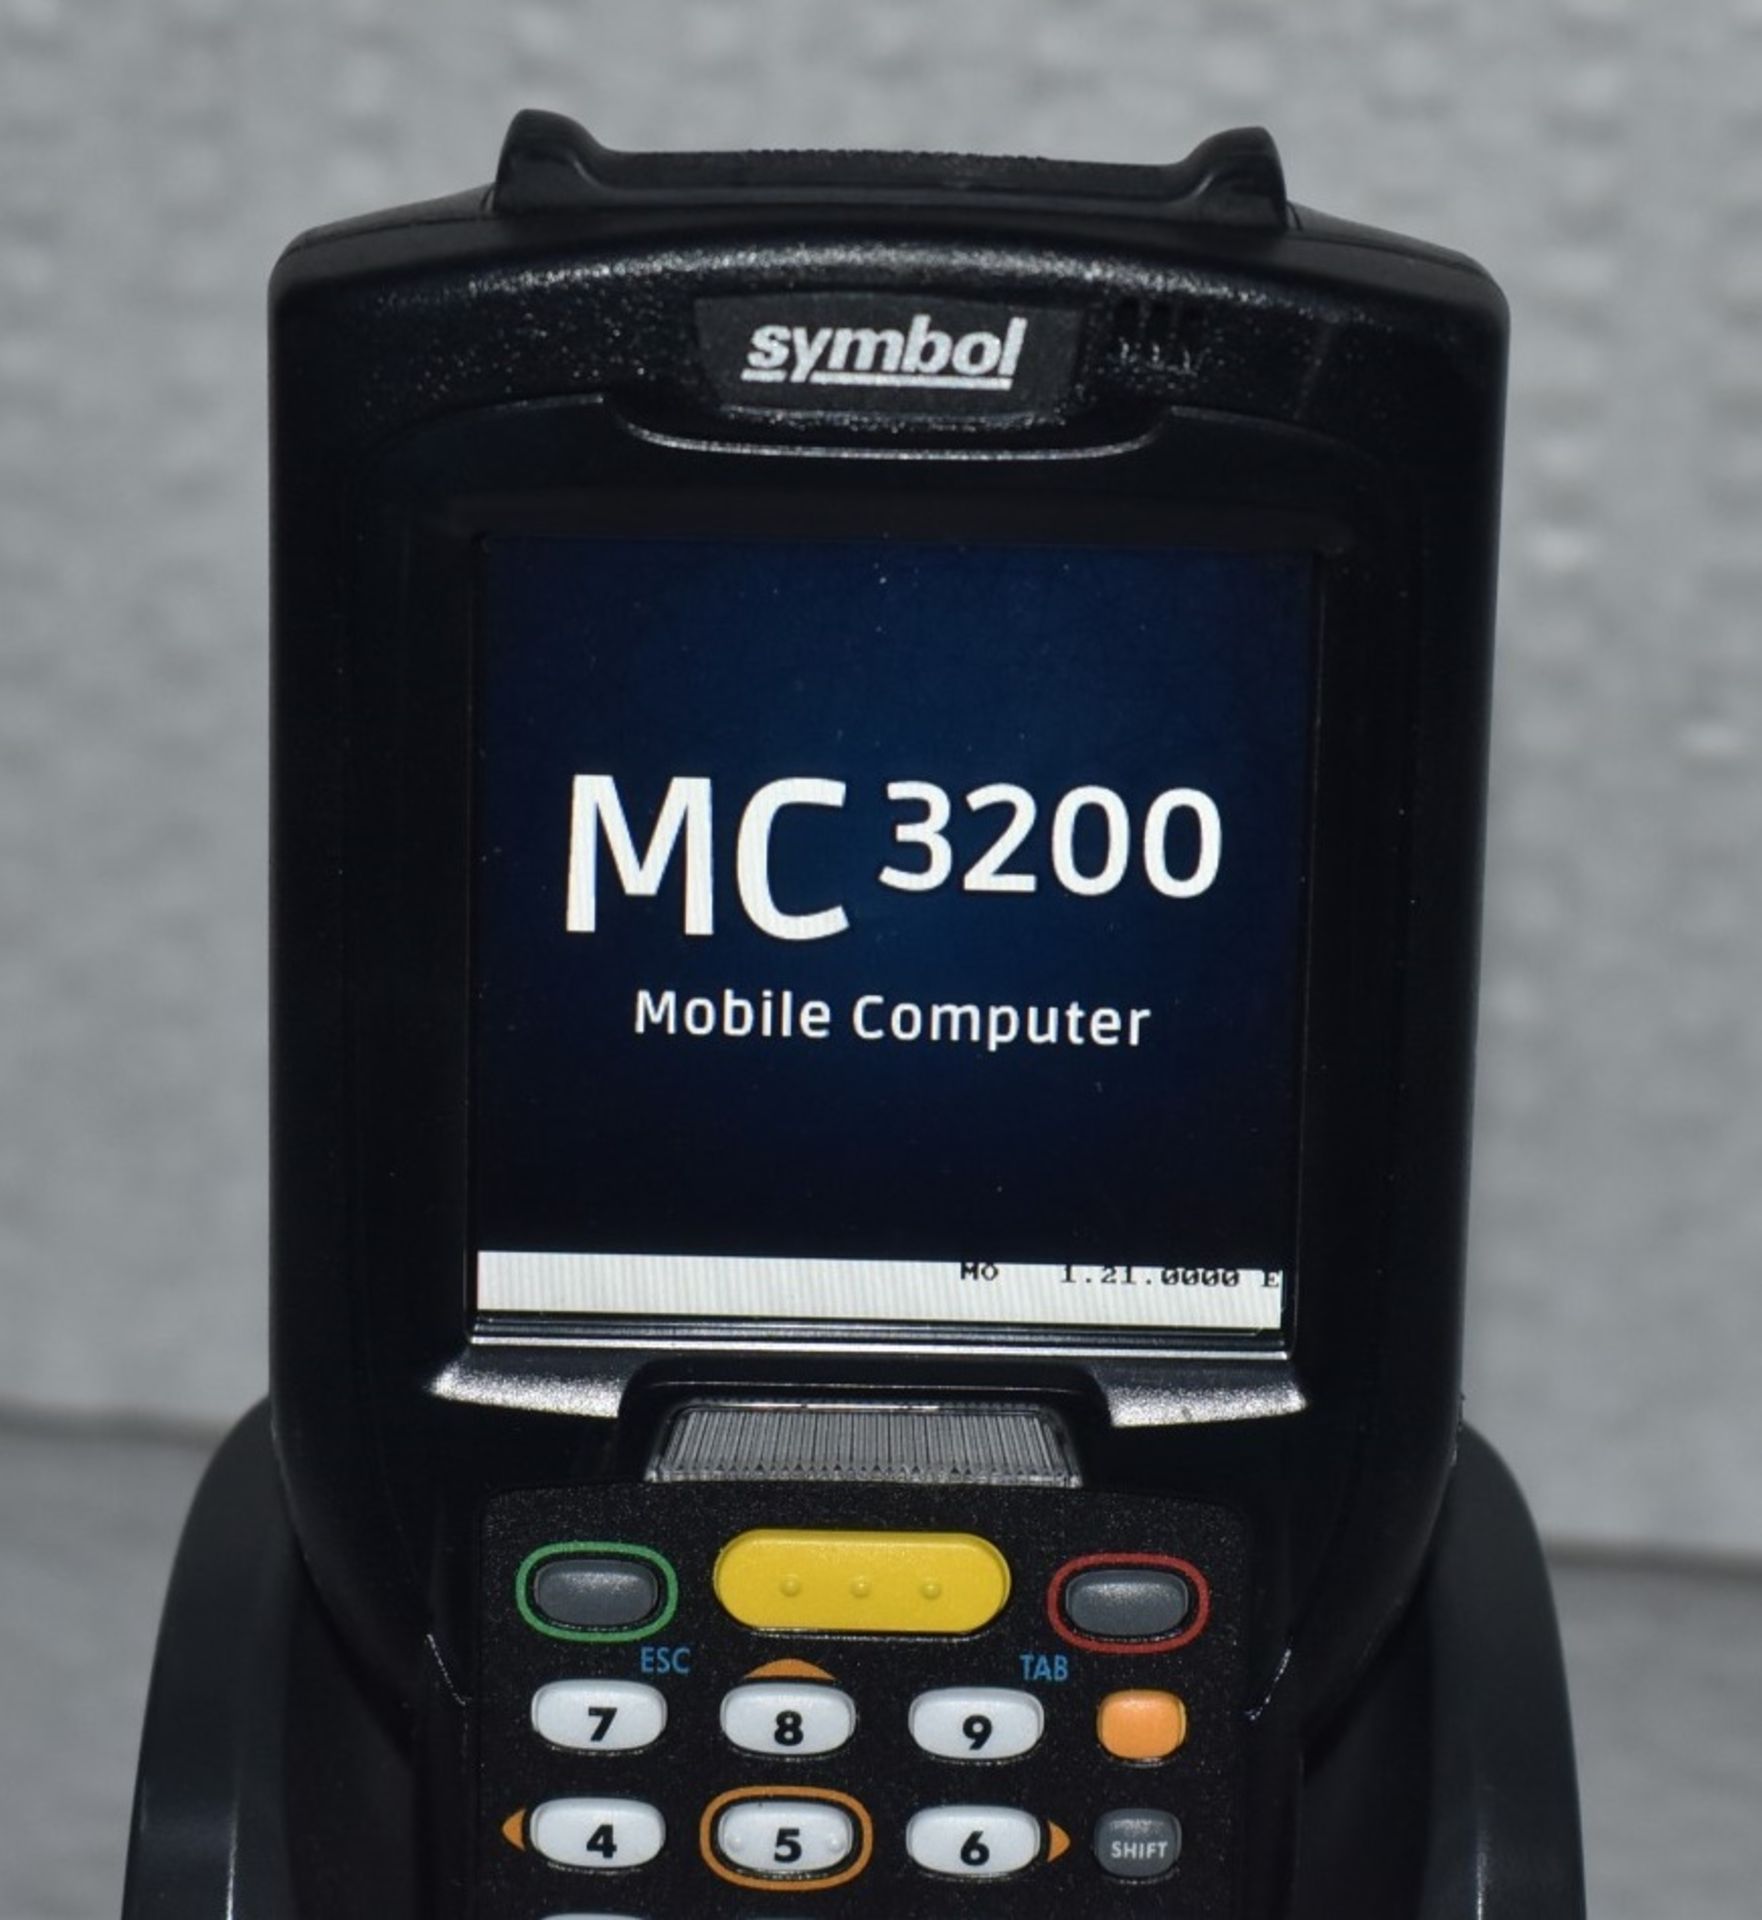 1 x Symbol MC3200 38 Key Laser Scanner With Docking Station - Features Windows Compact OS, - Image 9 of 10